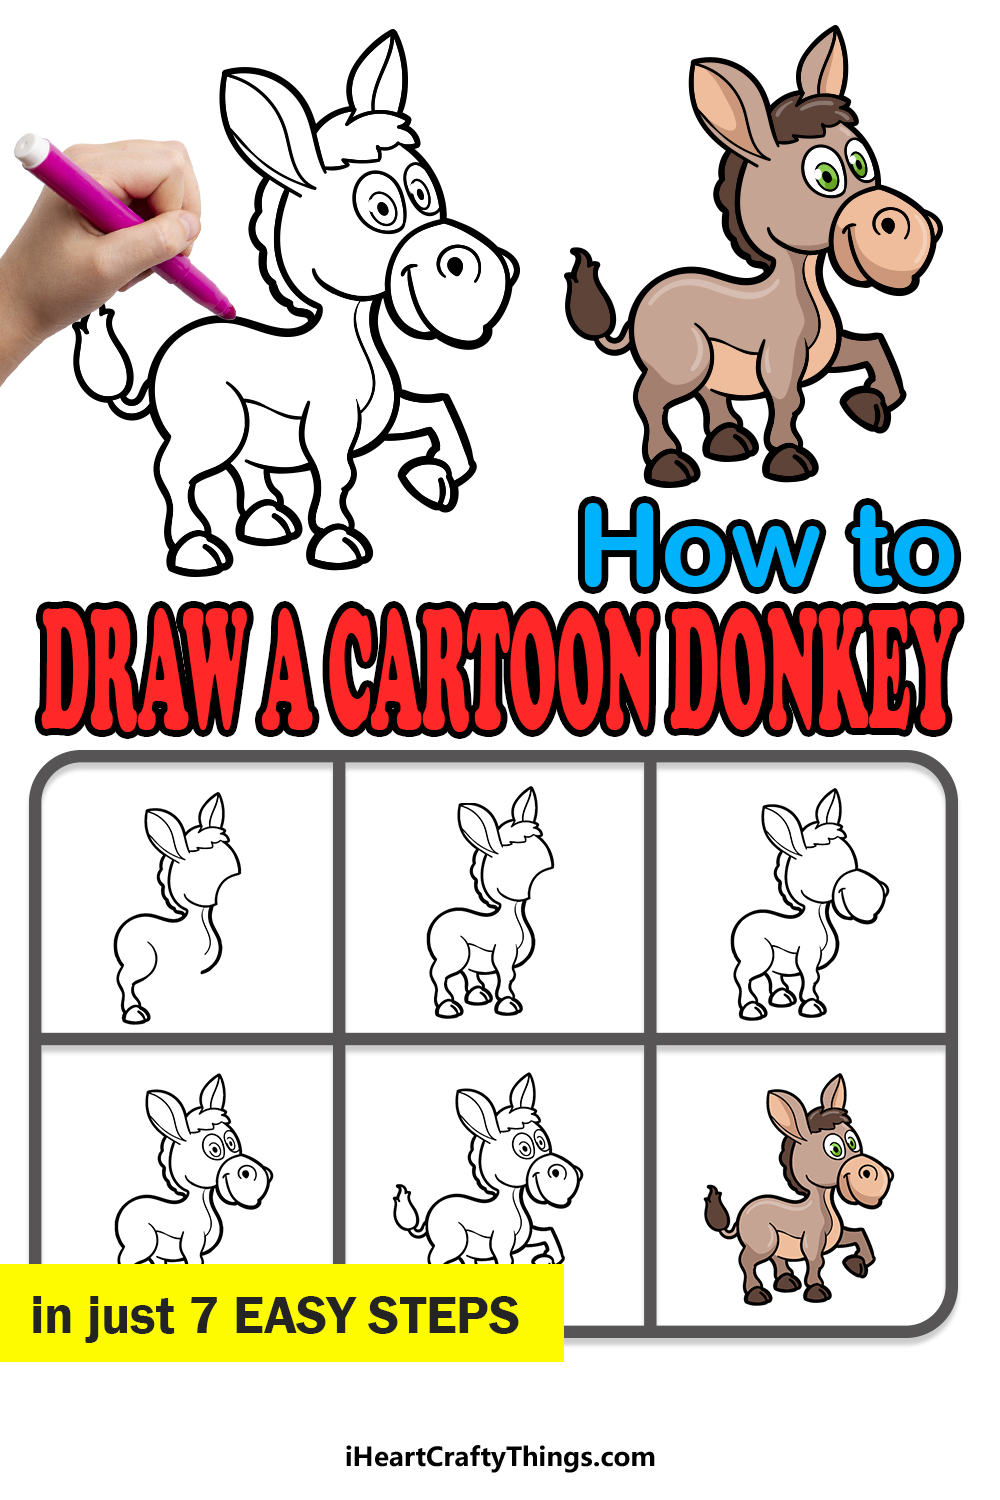 how to draw a cartoon donkey in 7 easy steps